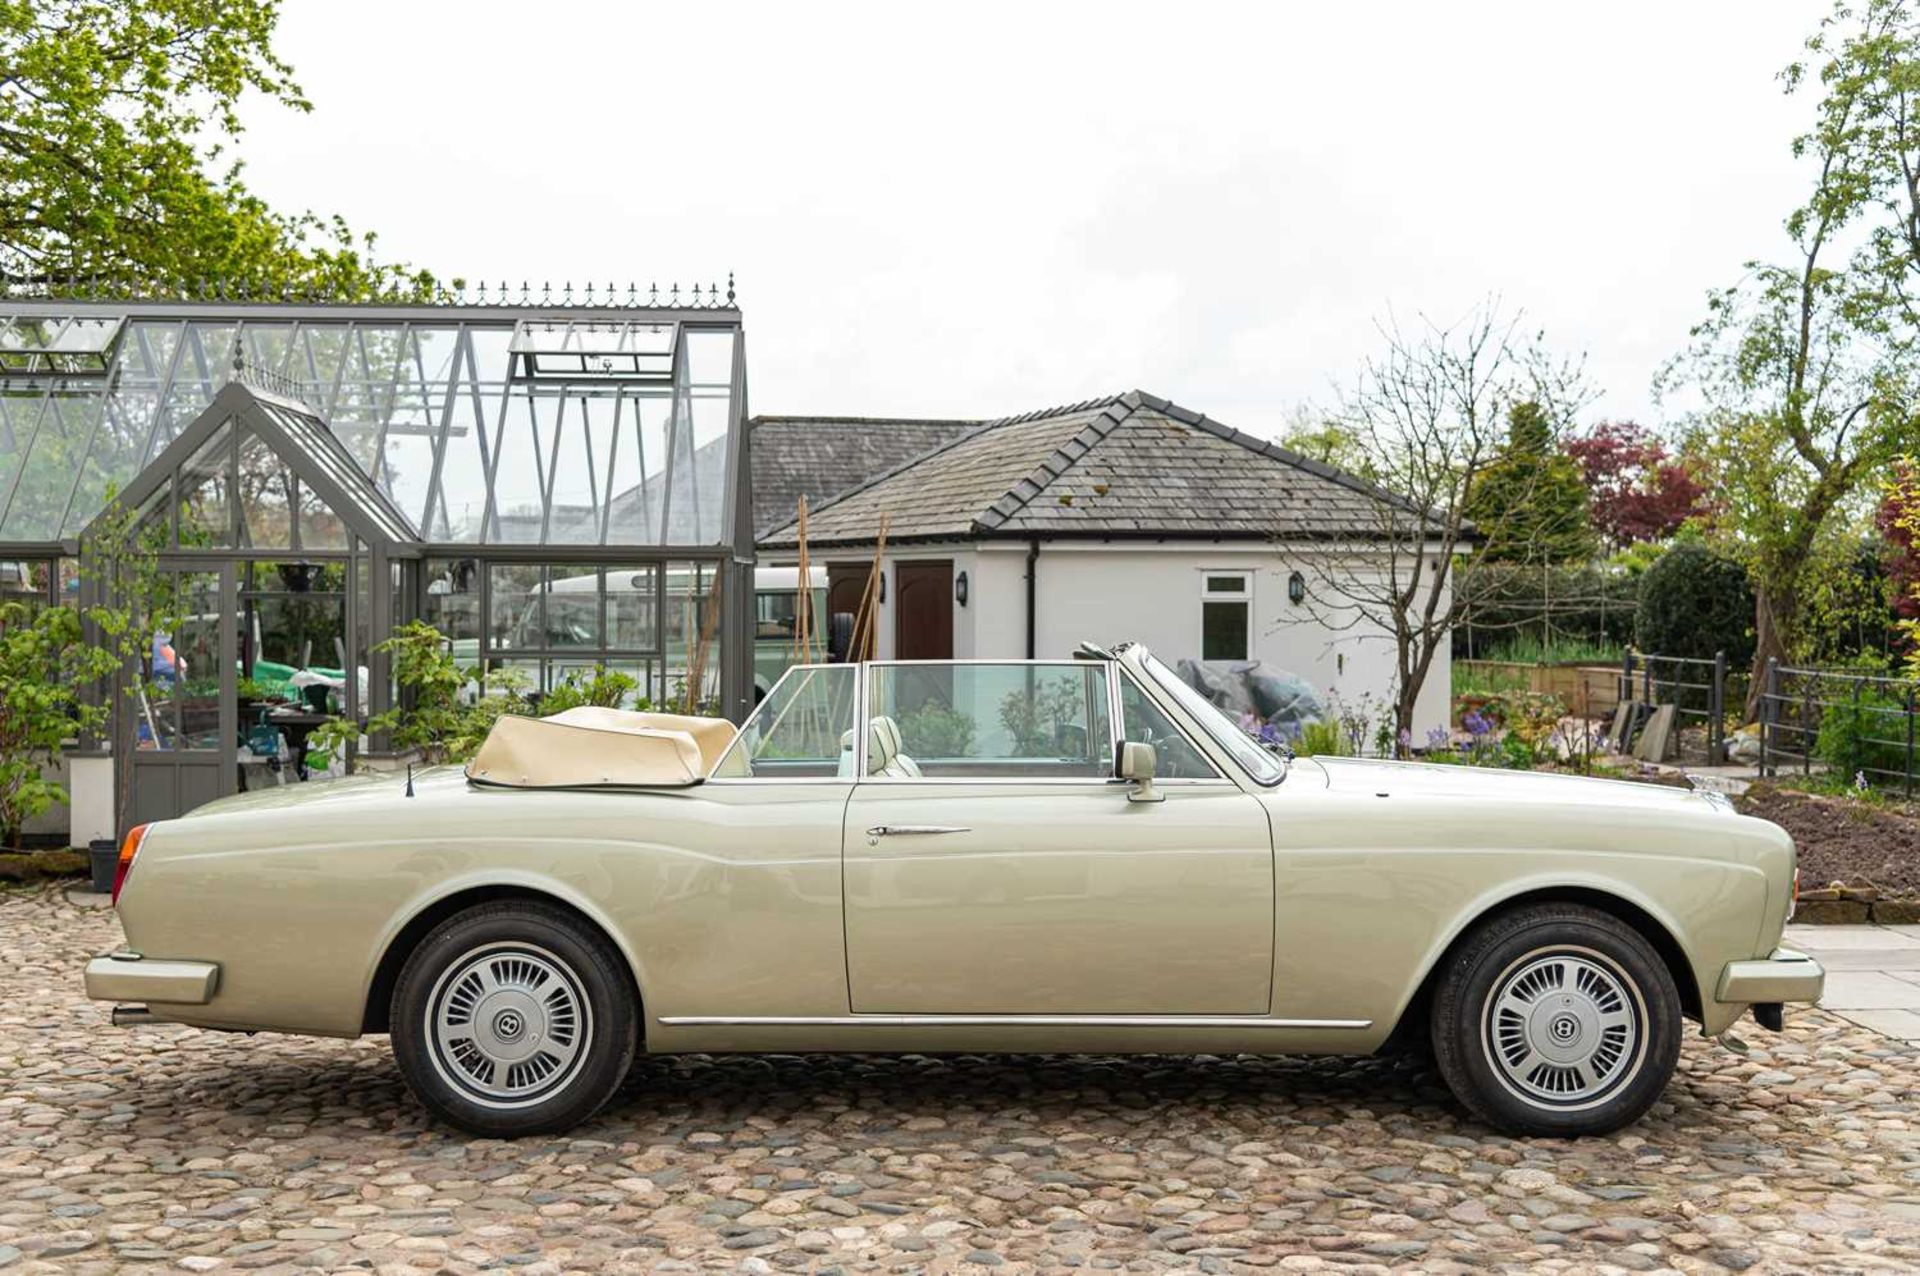 1985 Bentley Continental Convertible Rare early carburettor model by Mulliner Park Ward - Image 14 of 76